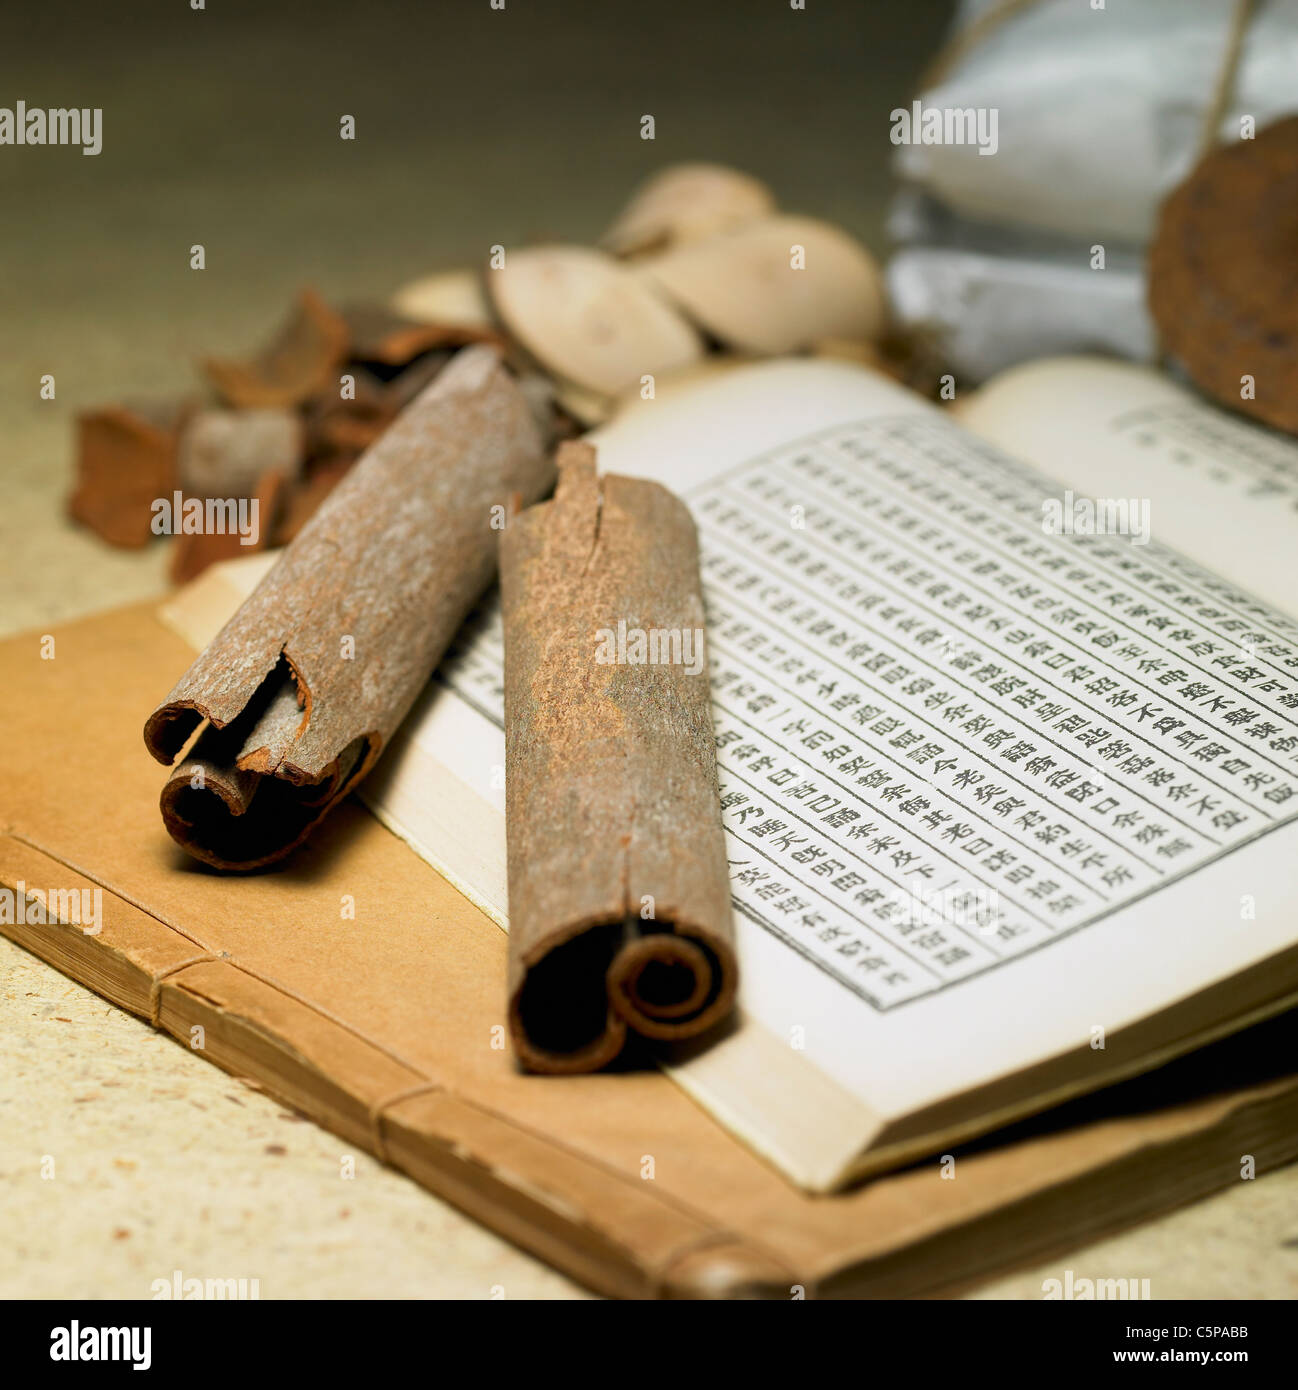 Dried medicinal herbs and ancient book Stock Photo